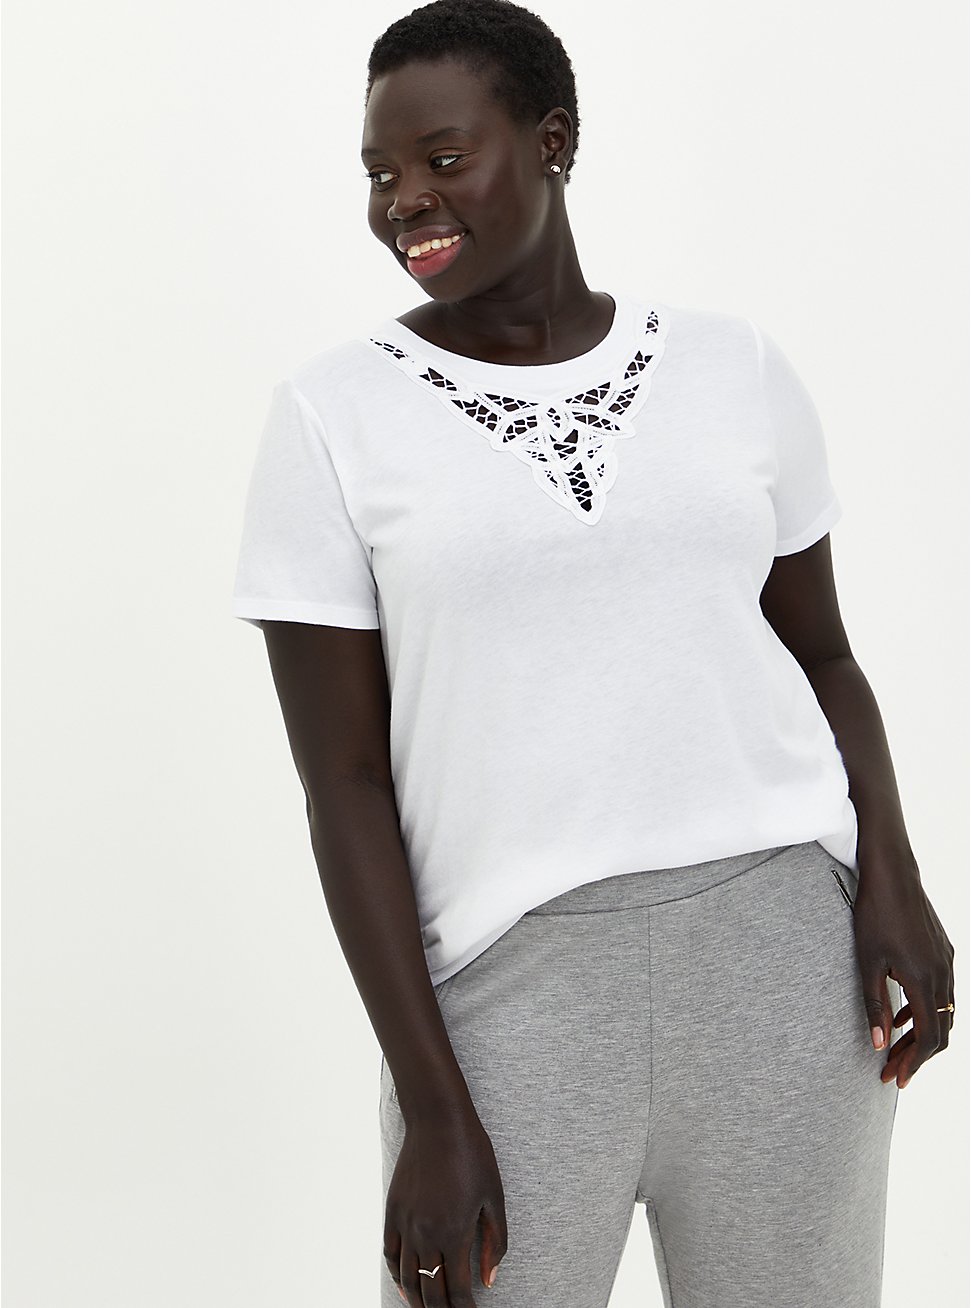 White Embroidered Tee , BRIGHT WHITE, hi-res